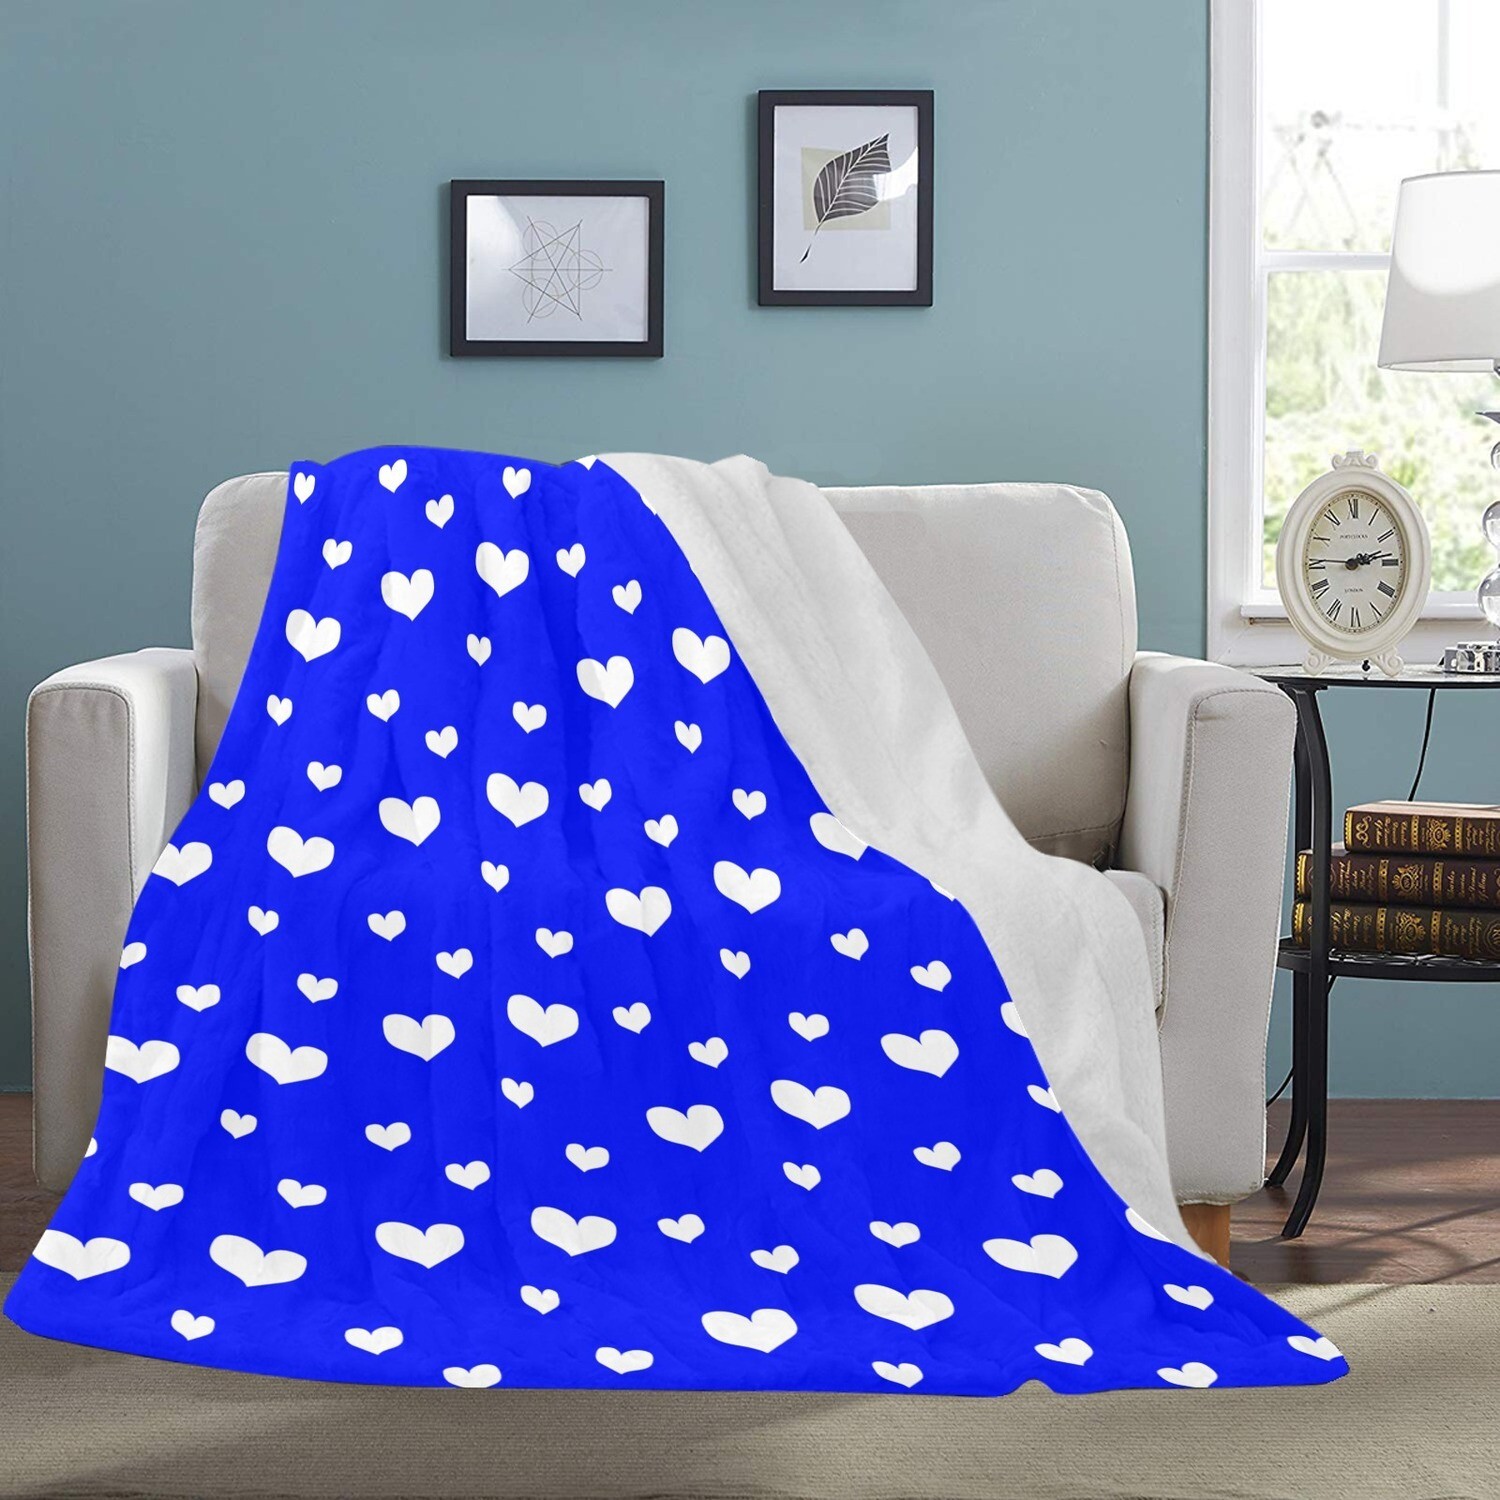 🤴🏽👸🏽💕Large Ultra-Soft Micro Fleece Blanket Valentine white hearts on royal blue, gift, gift for her, gift for him, gift for them, 70"x80"